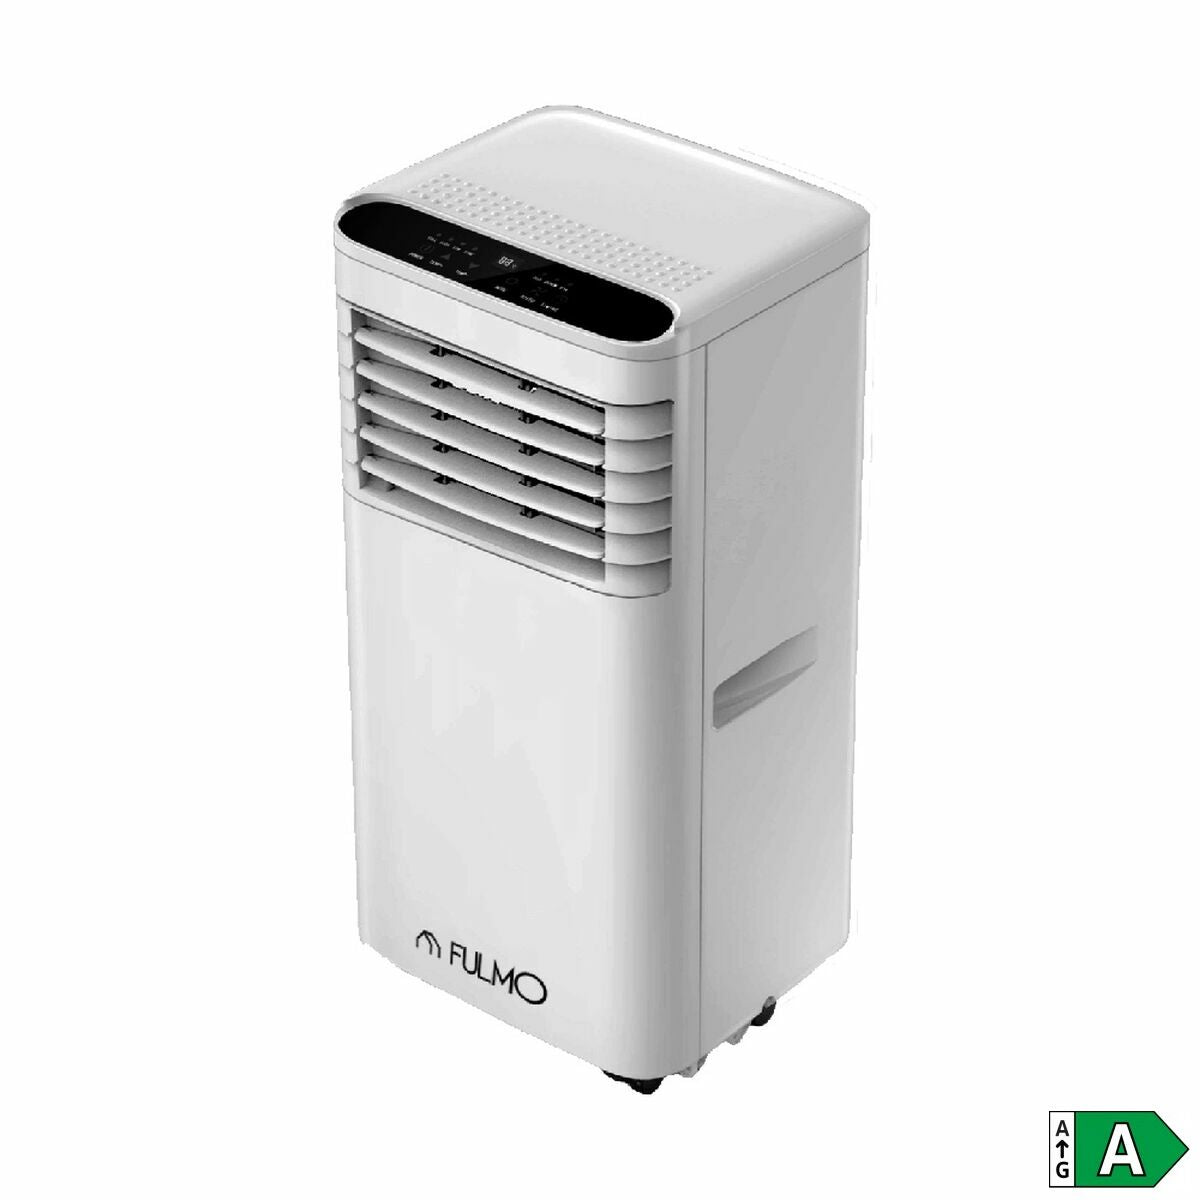 Draagbare Airconditioning Fulmo Wit A 800 W